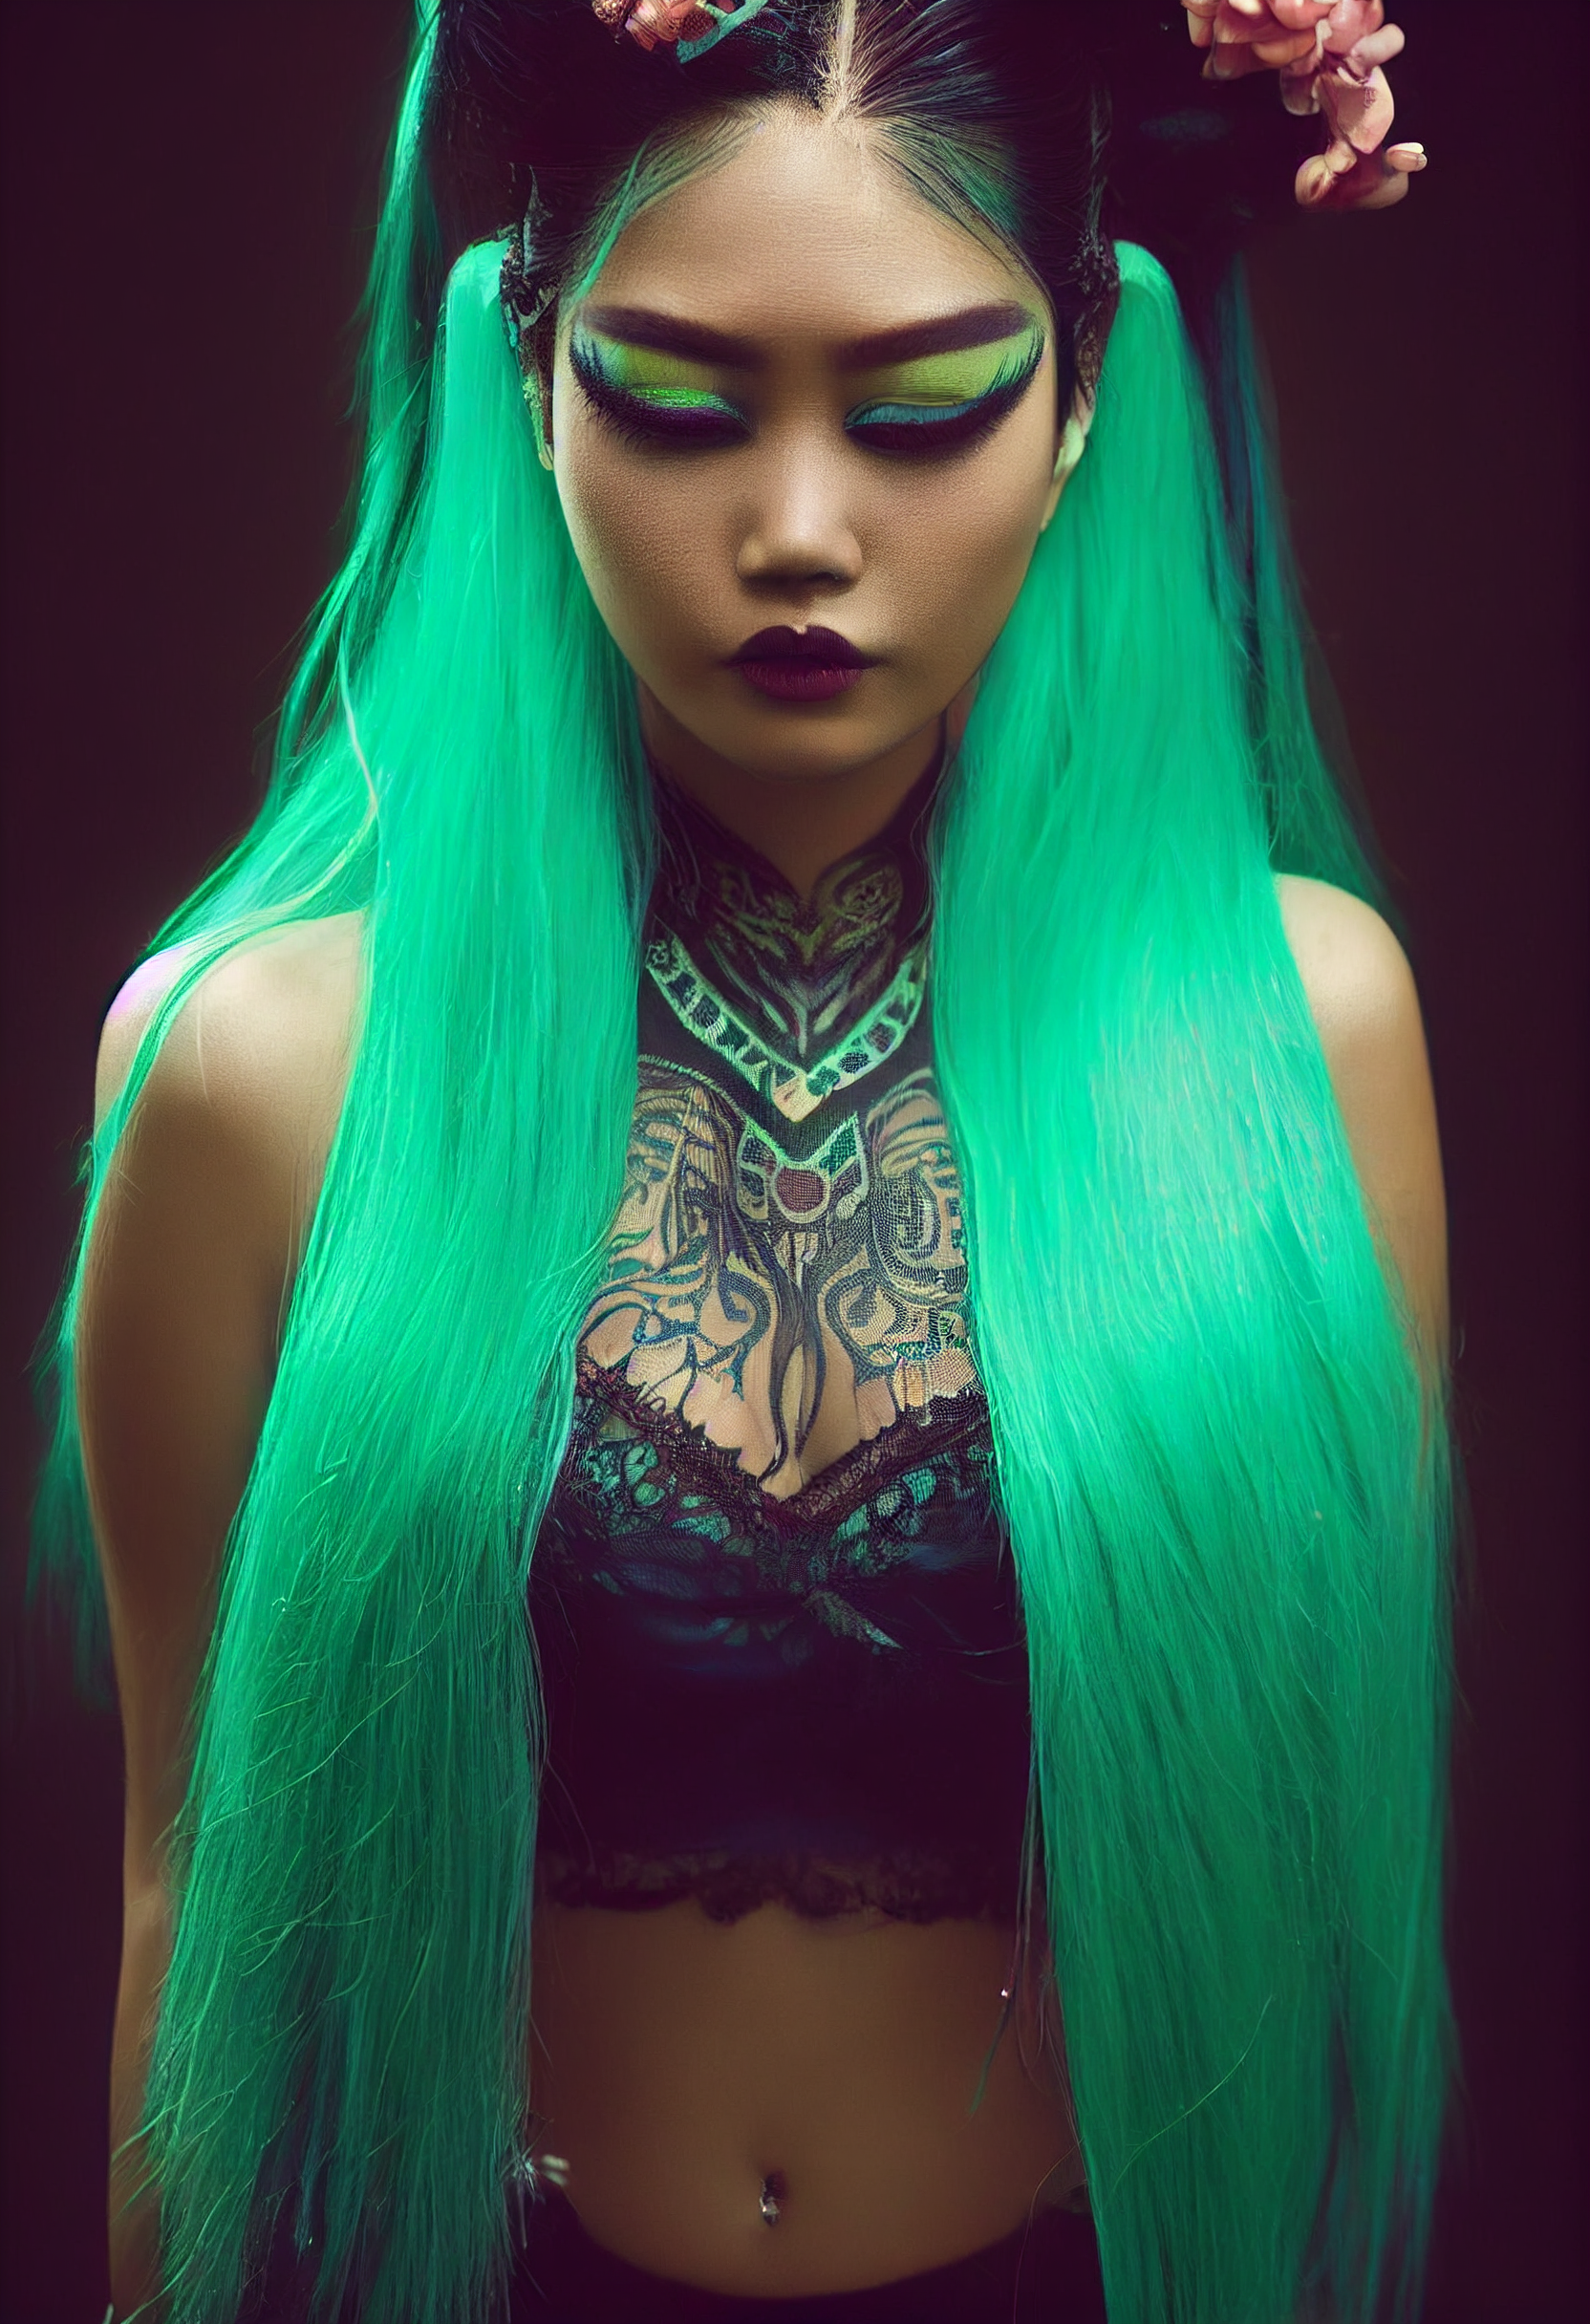 Blue-Green Hair, Lace Camisole